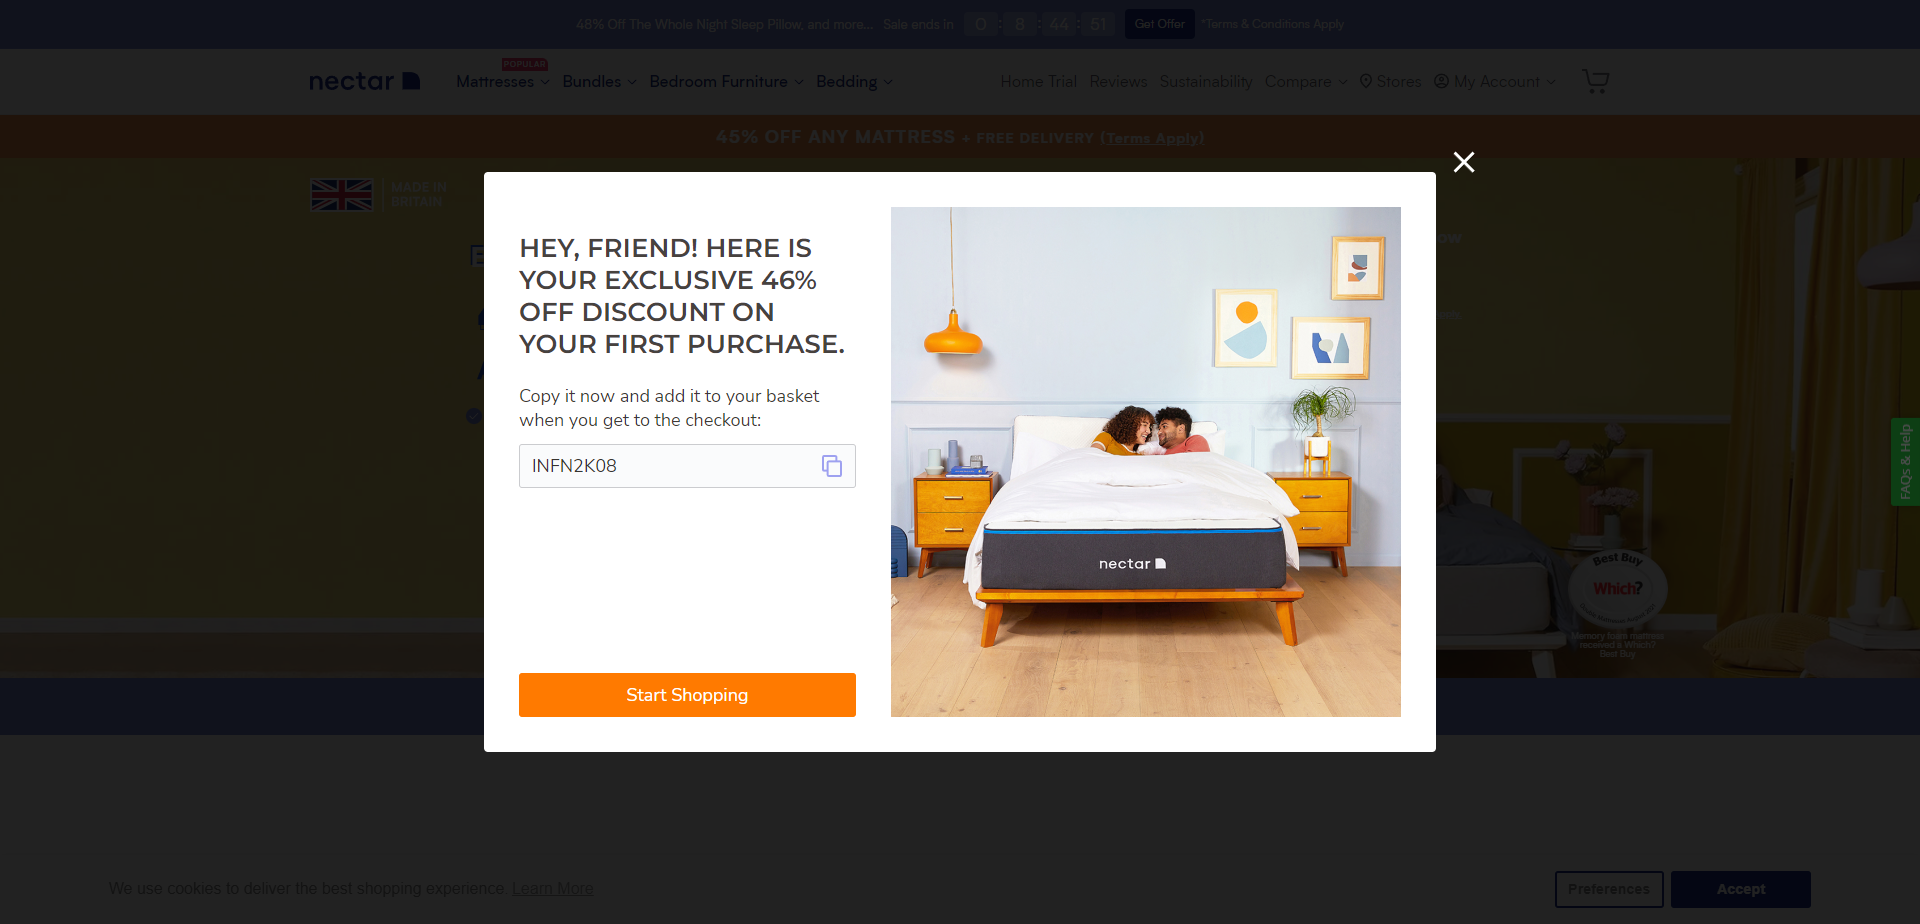 Referral Landing Page for Nectar Sleep